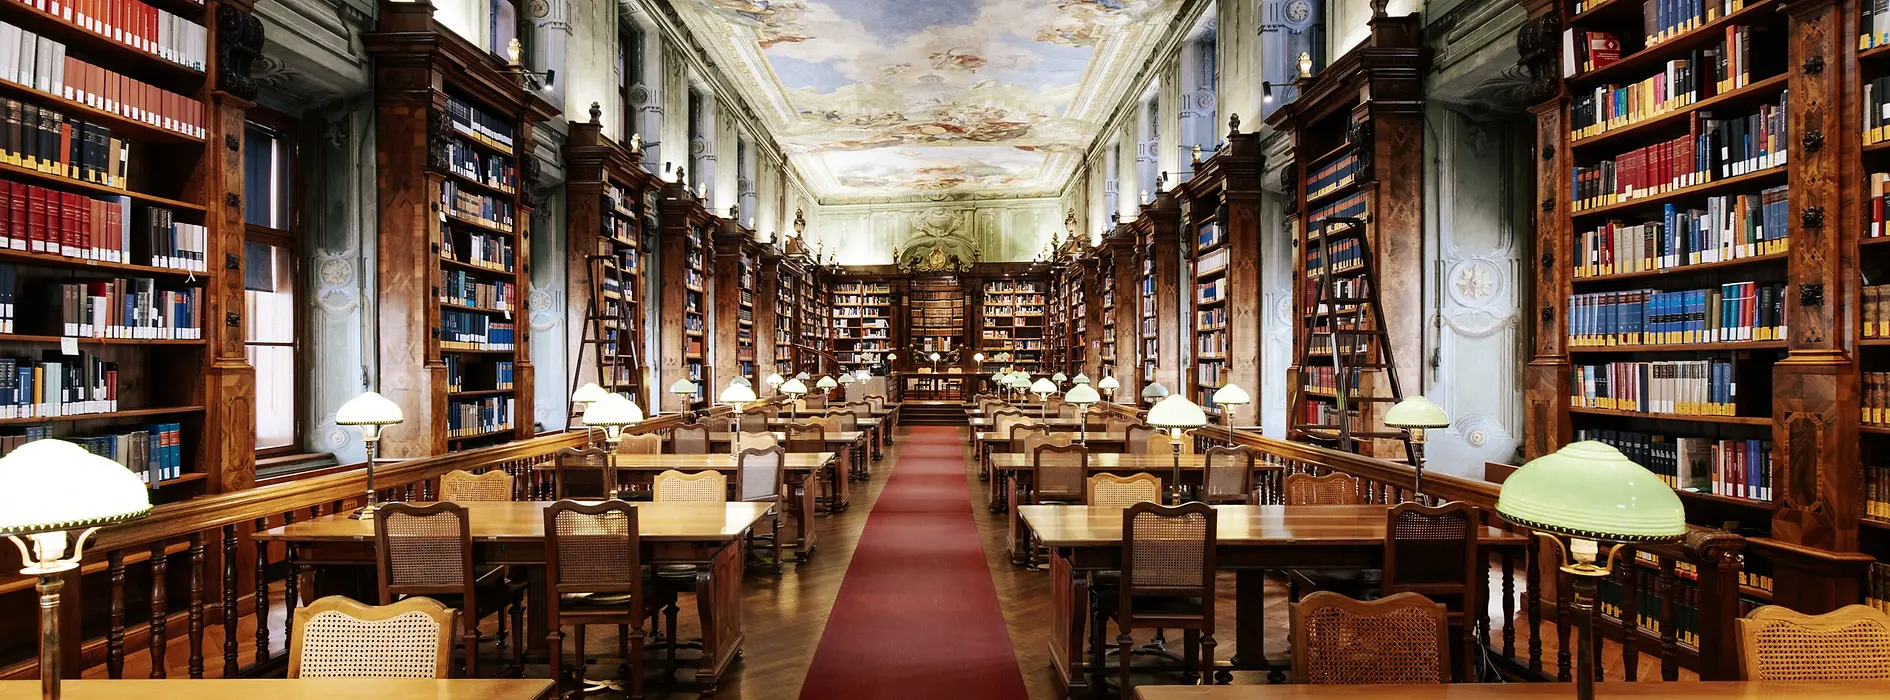 View inside the reading room of the National Library